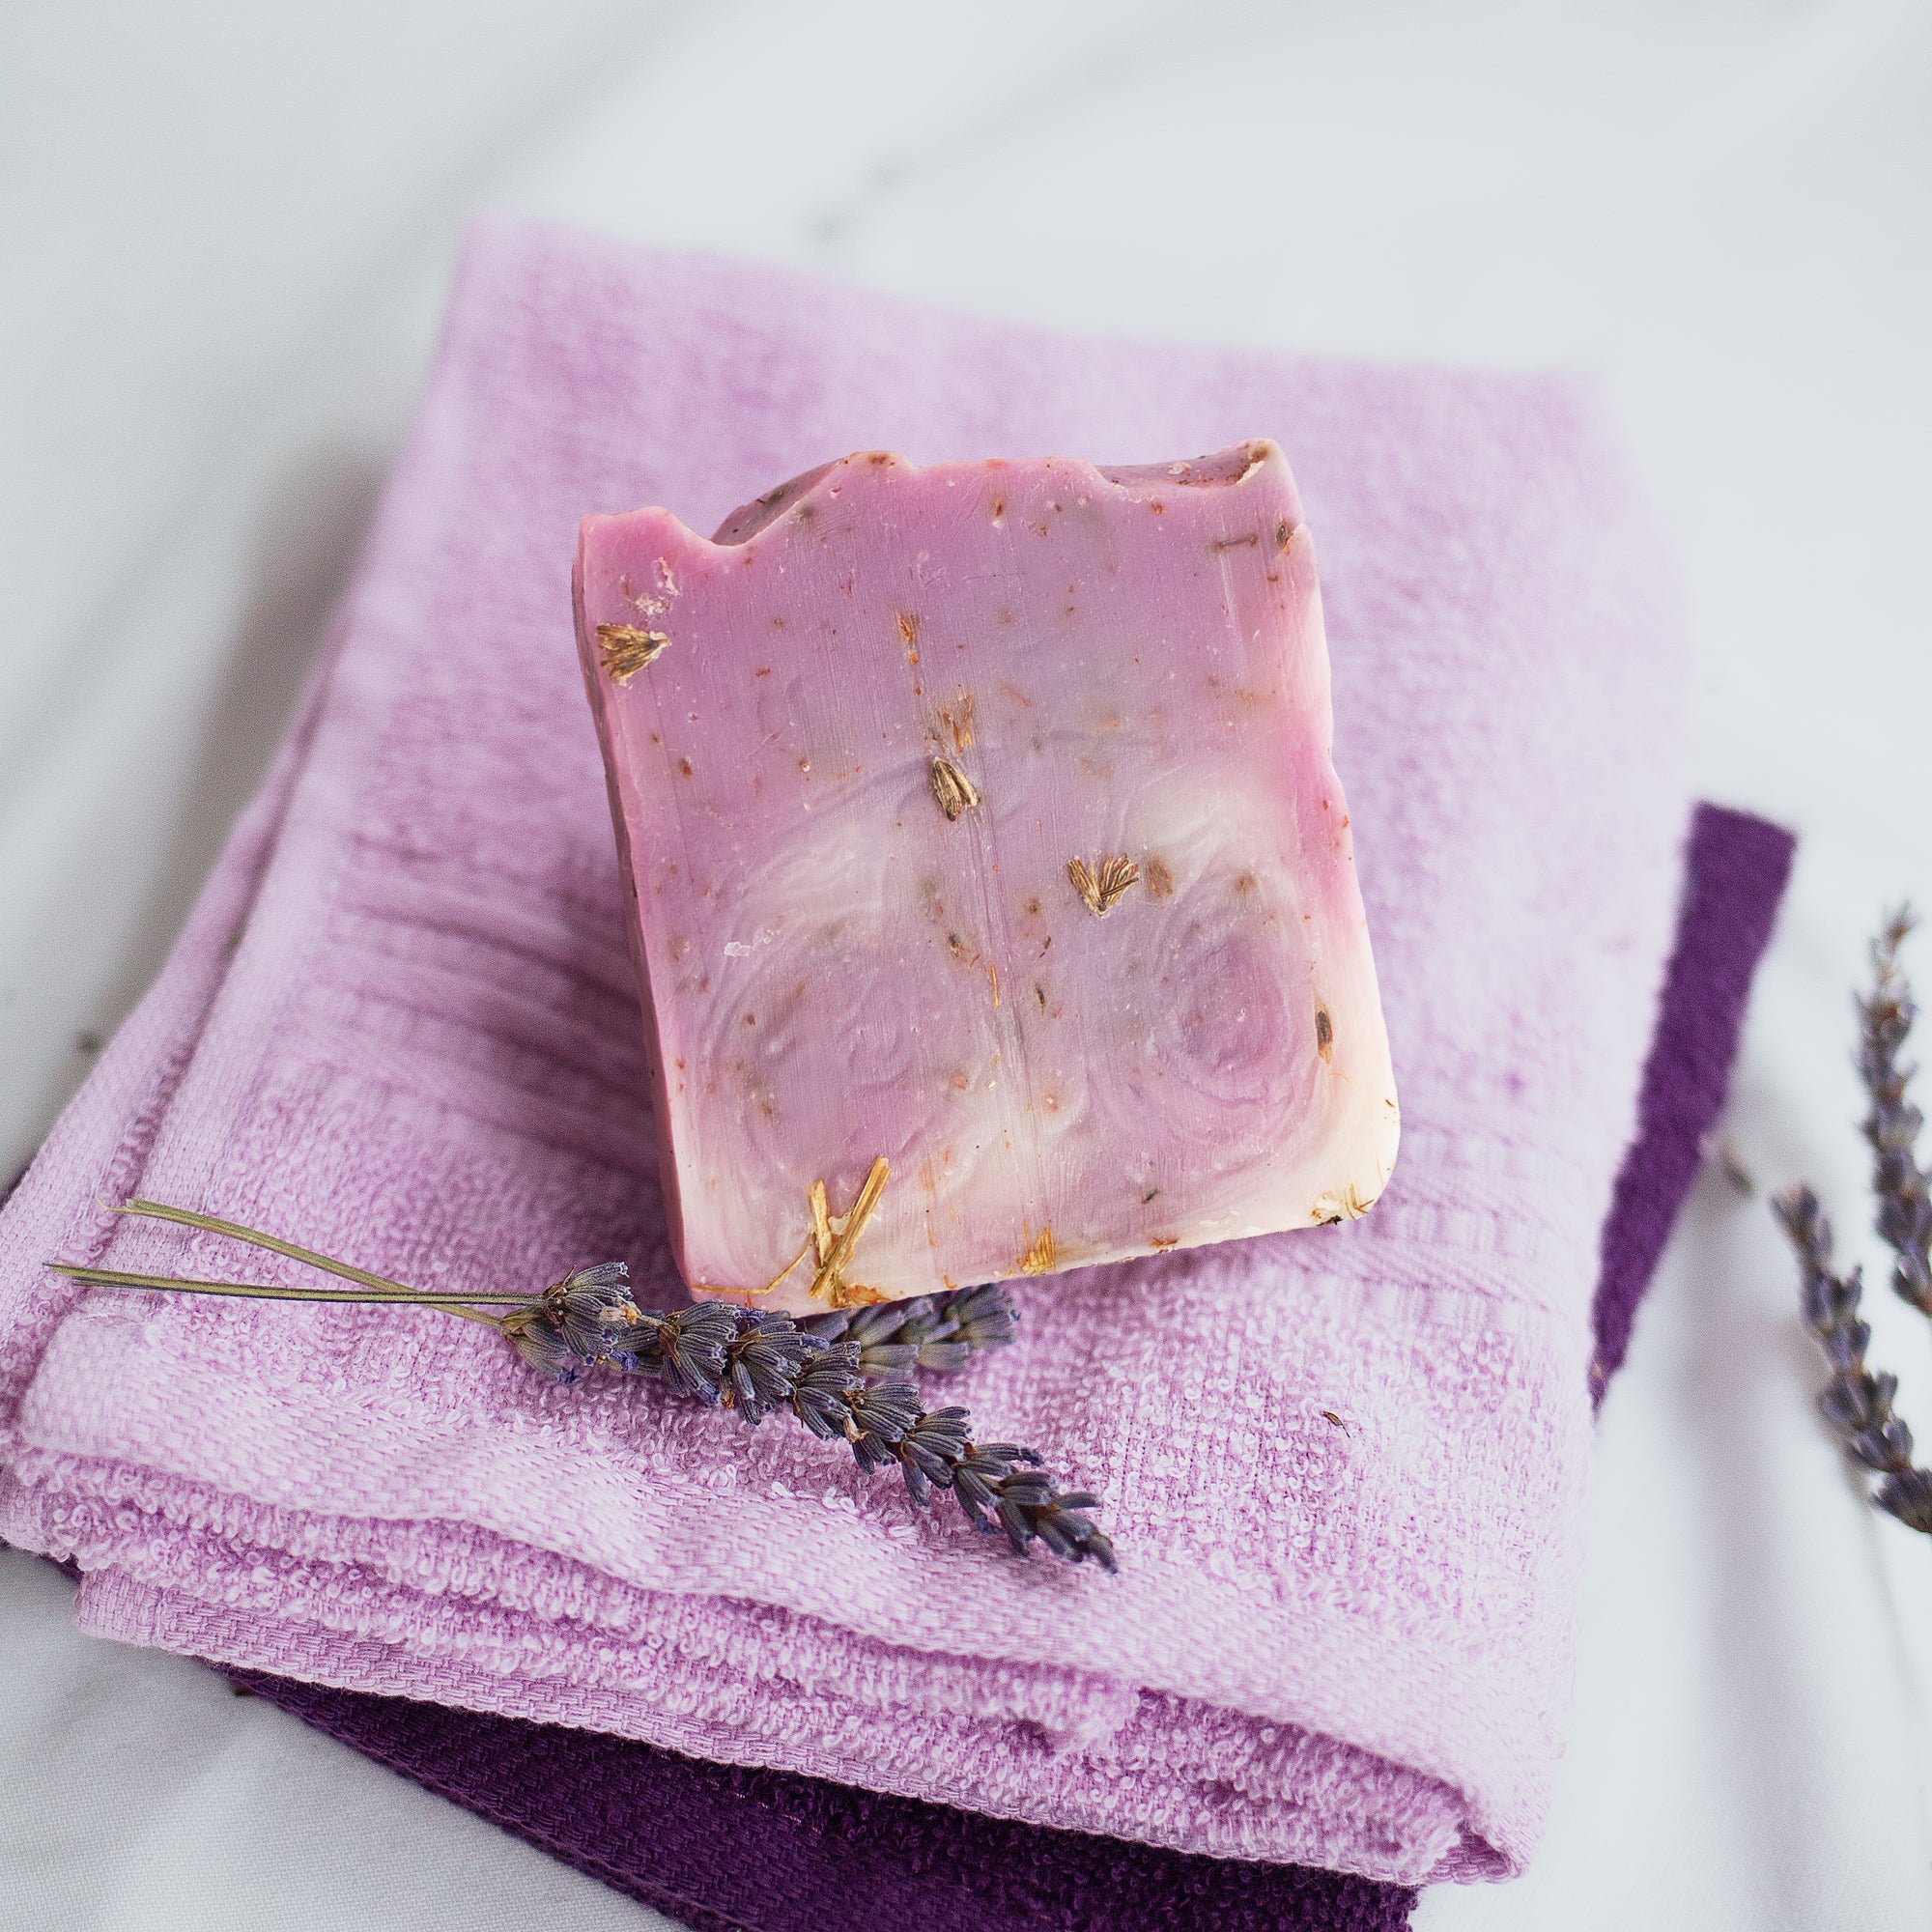 Lavender Soap - Lifestyle on top of purple towel